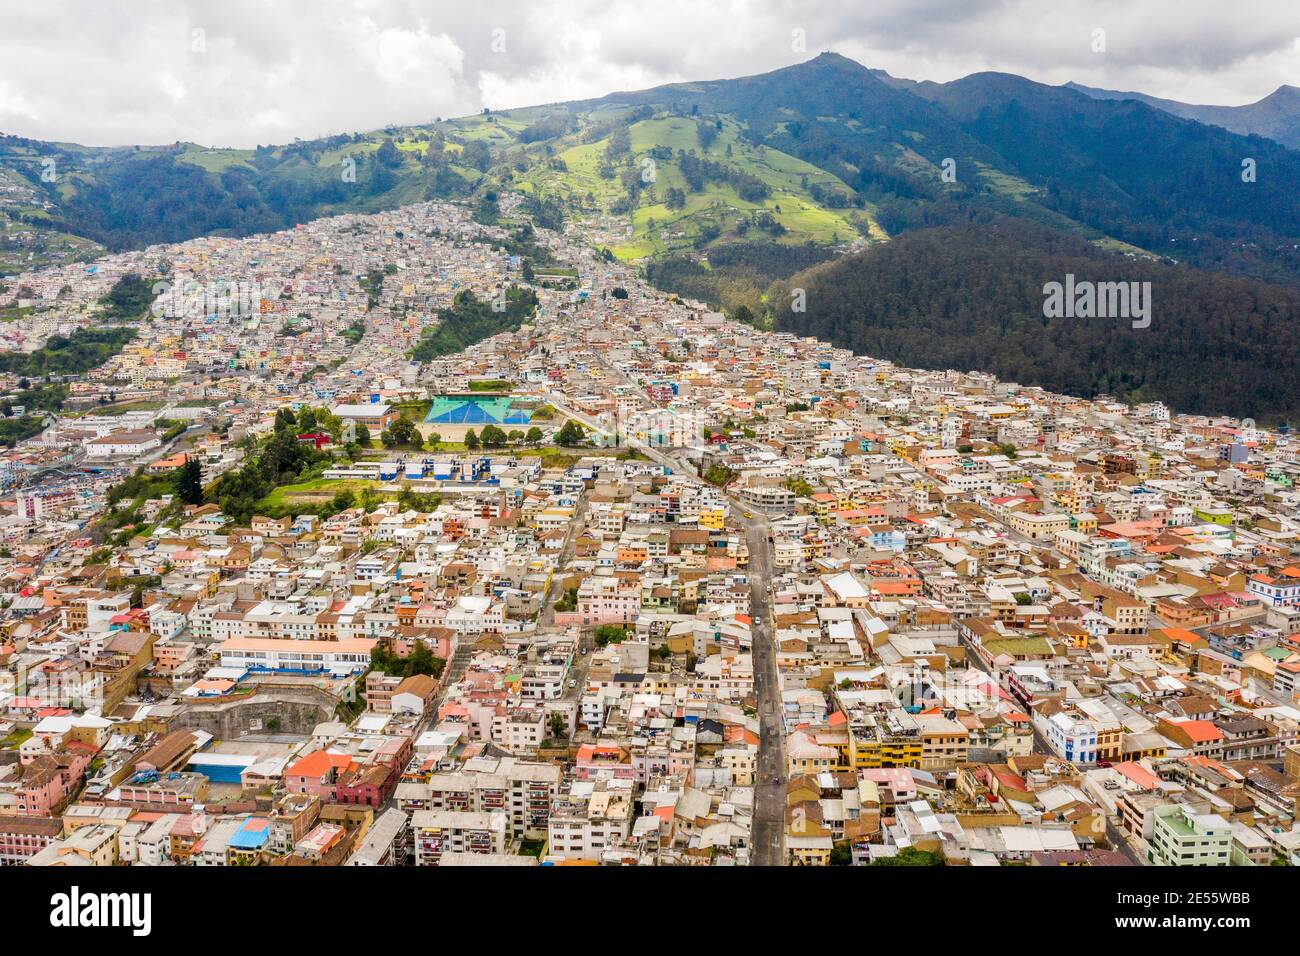 Aerial view shows the densely populated town of Quito in Ecuador. Stock Photo